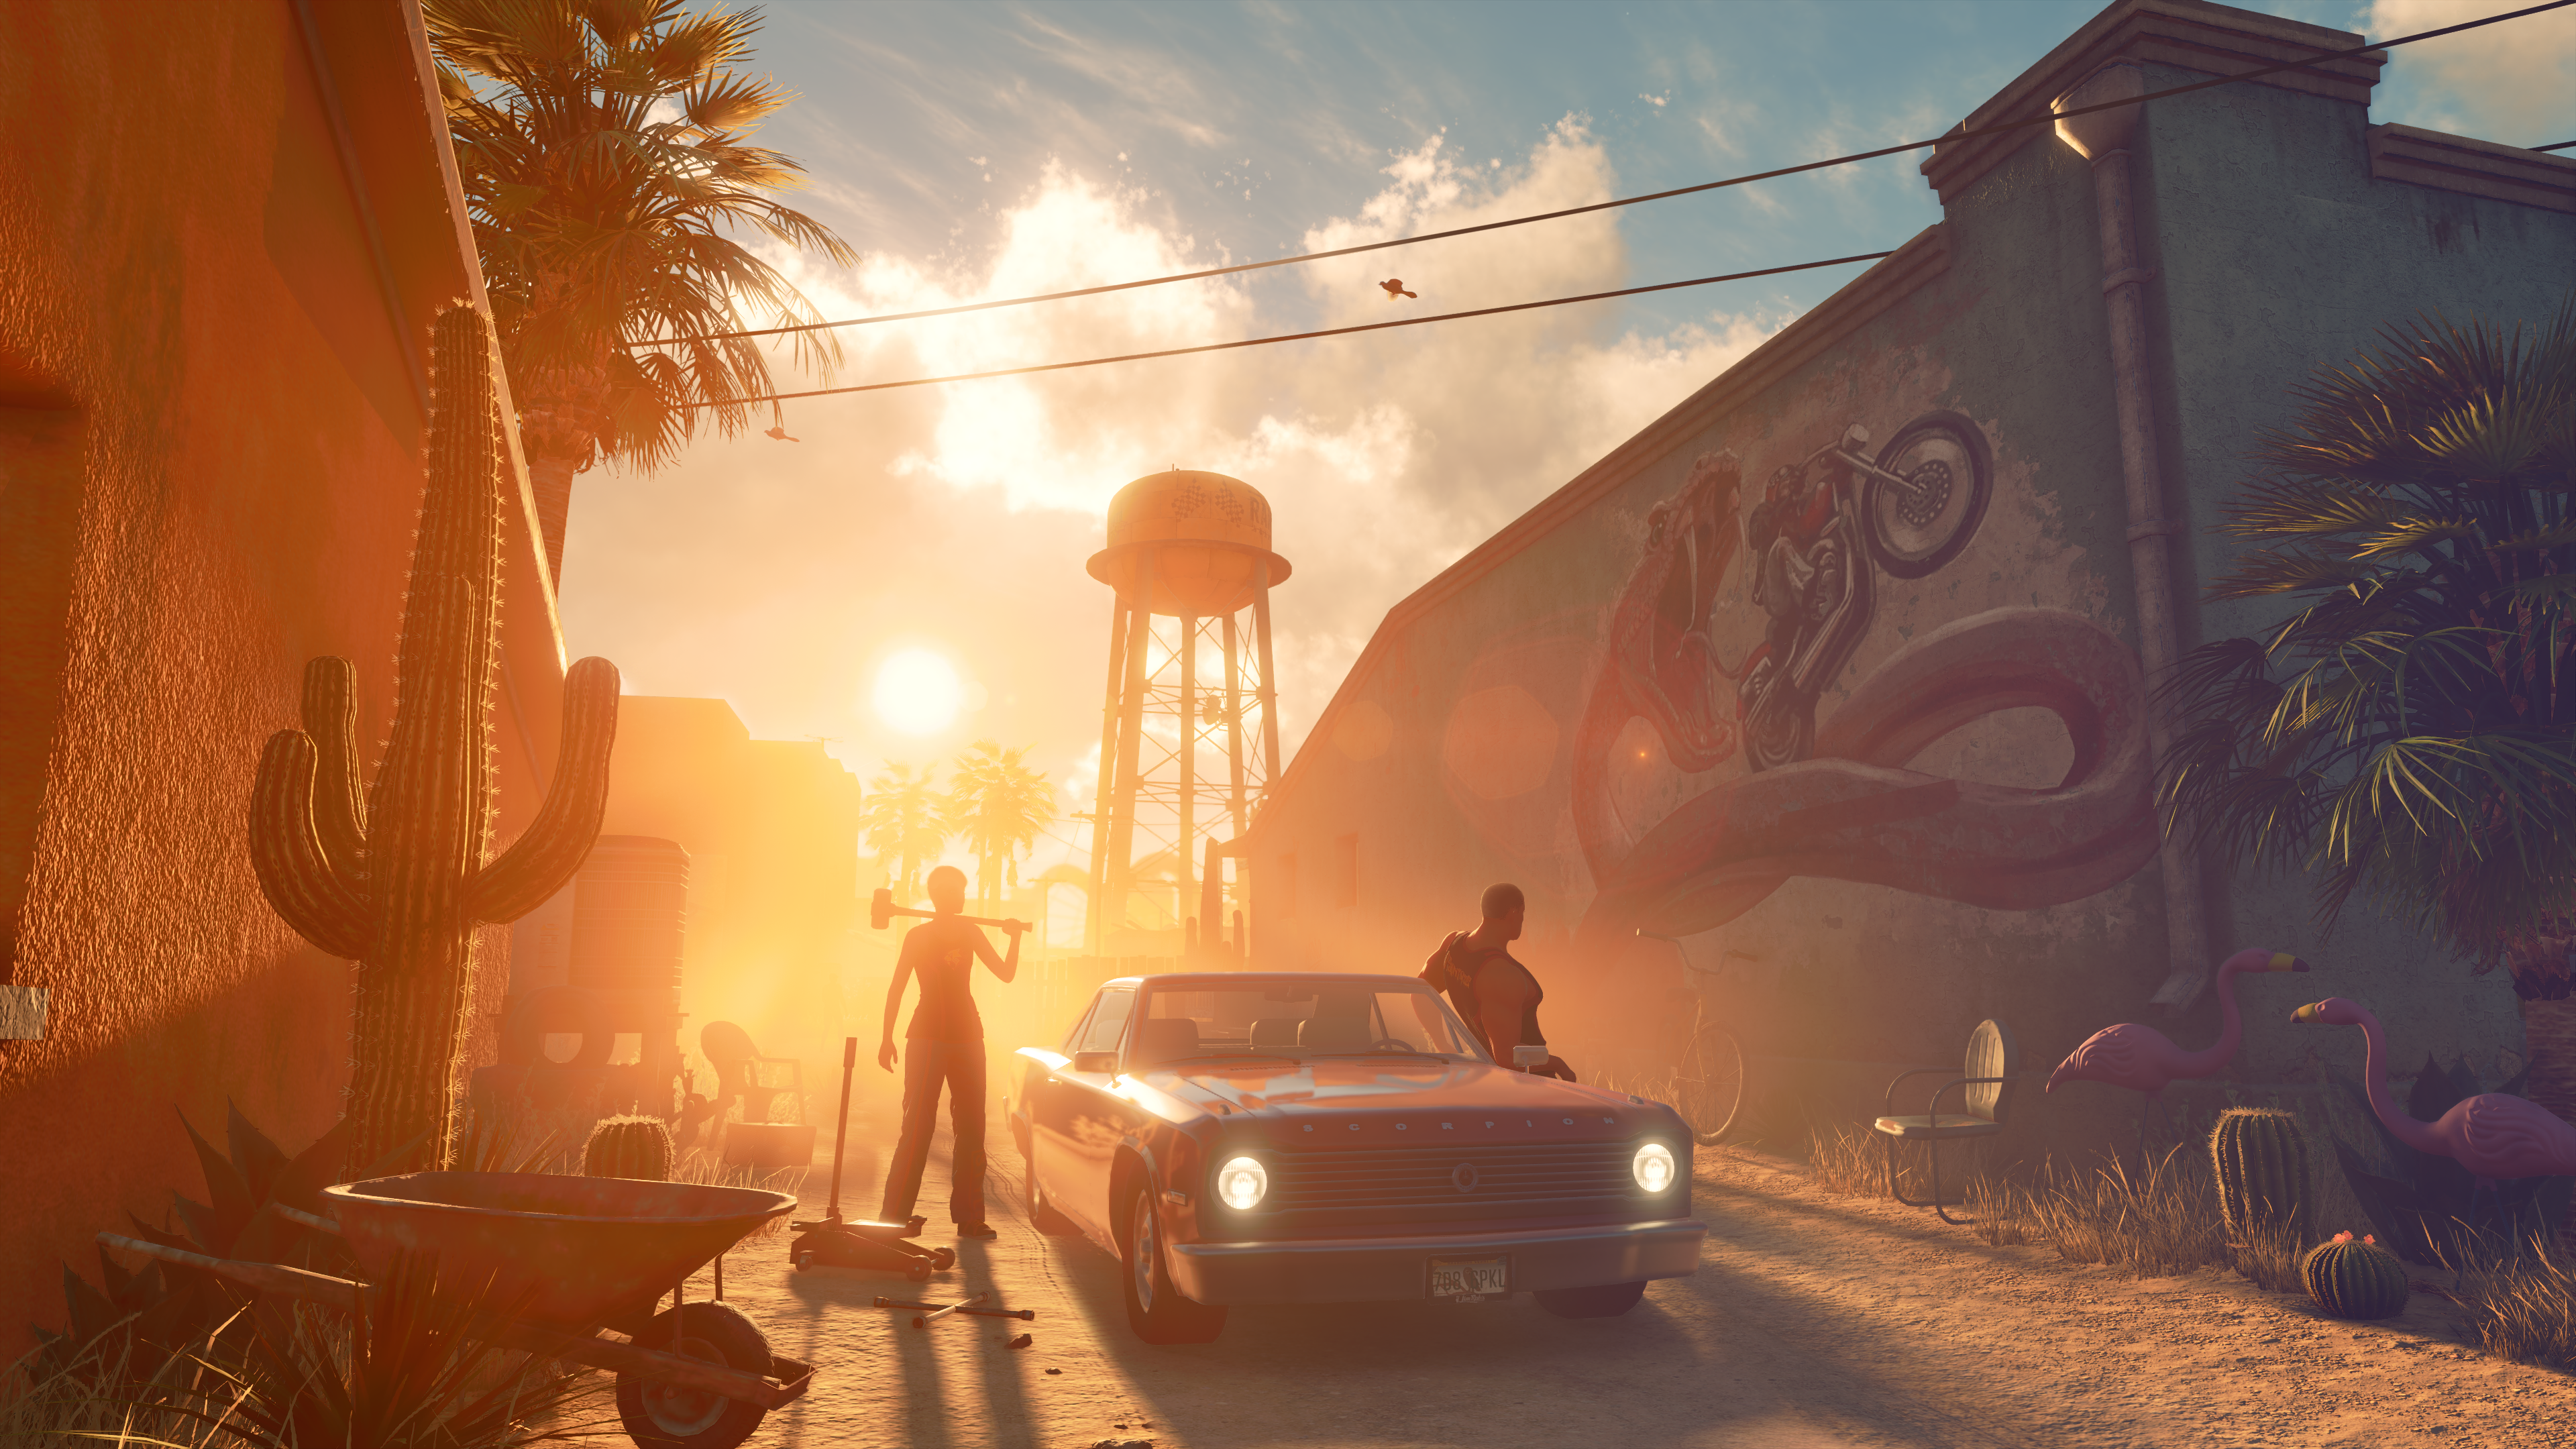 Saints Row reboot showing two figures standing beside a car in an alley, shadowed by the sun behind them